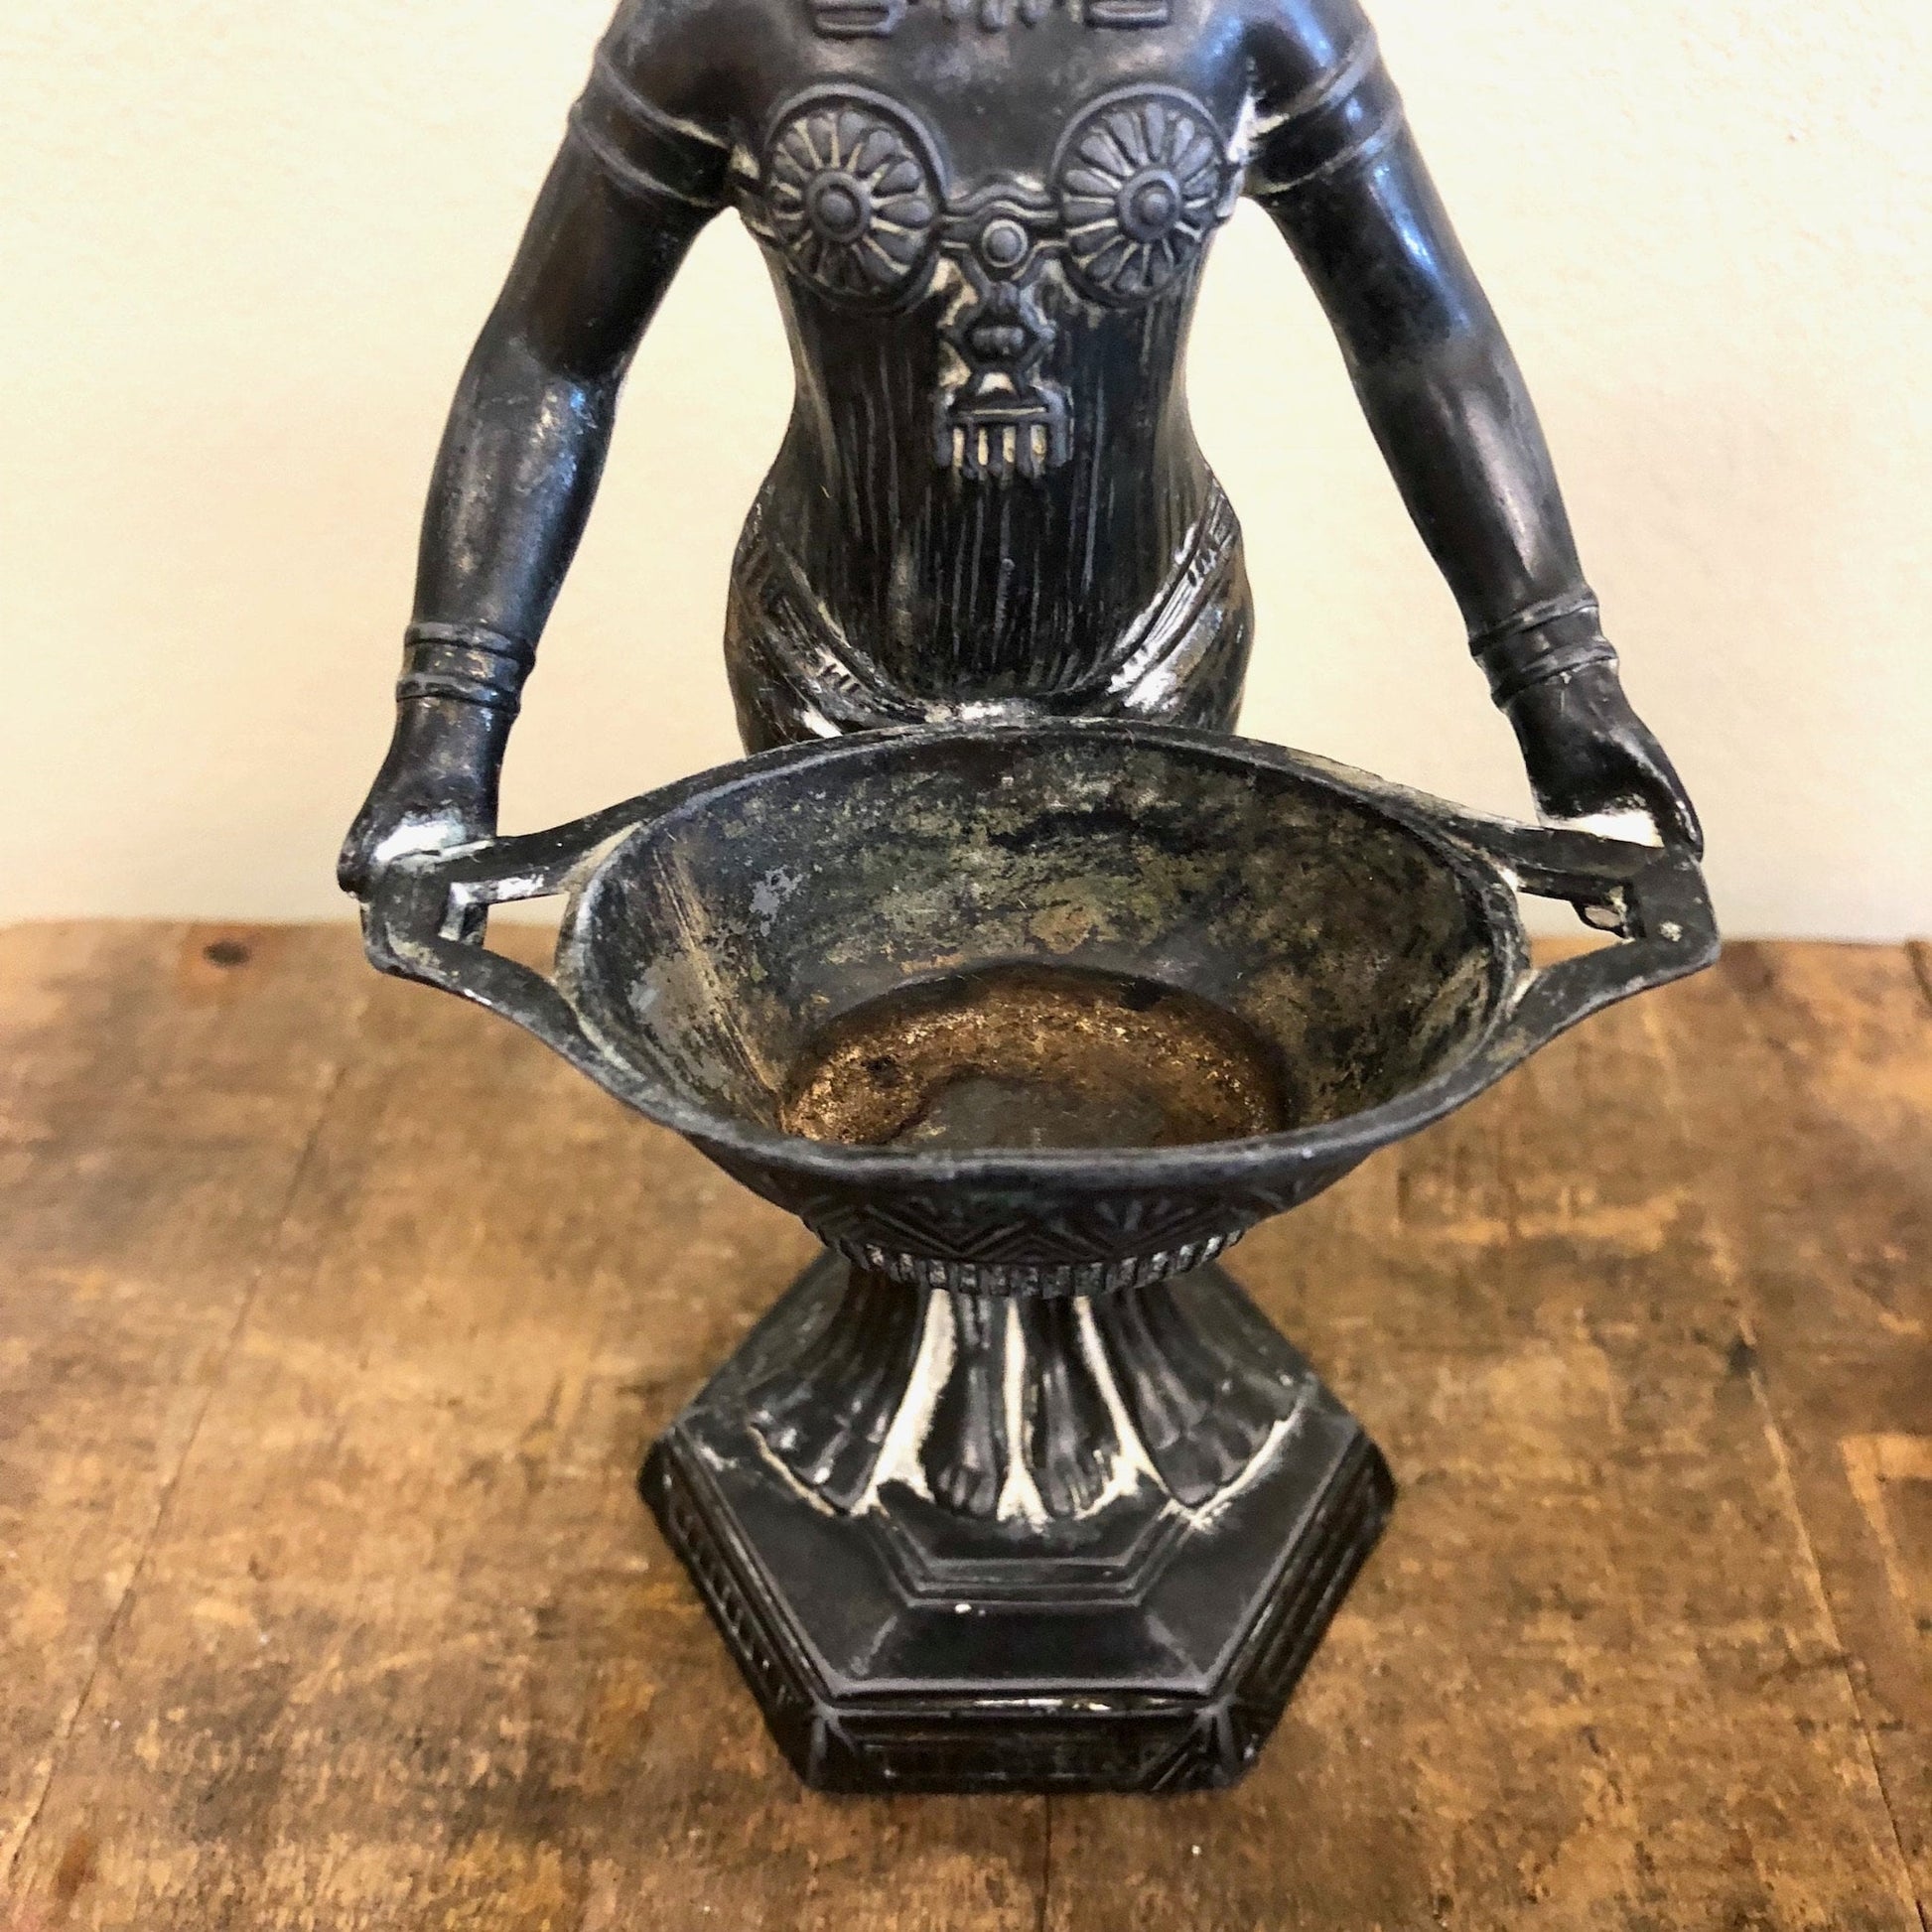 Bronze Egyptian Revival incense burner sculpture depicting a female figure holding a bowl, with detailed decorative designs on the base, in an antique patina finish.